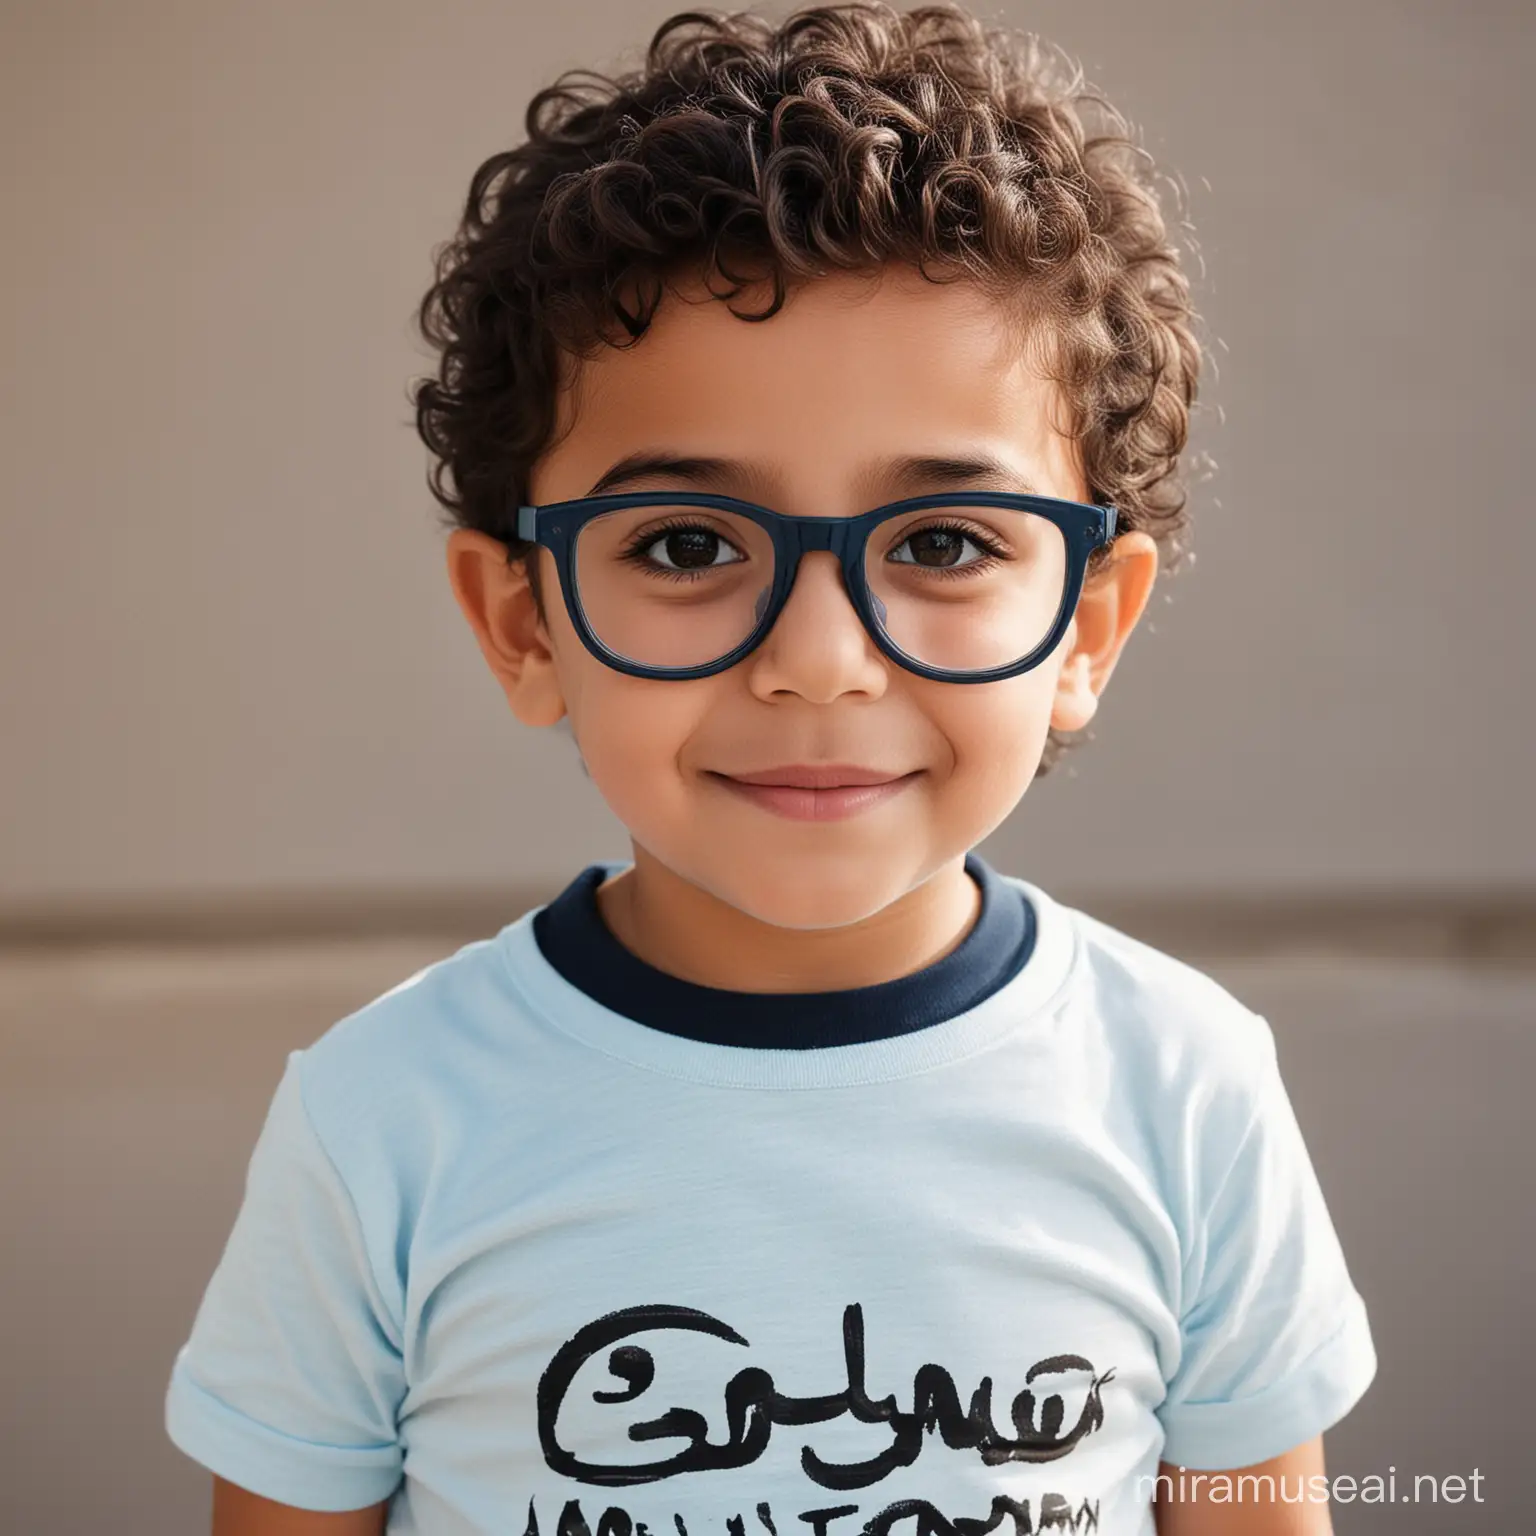 Young Arabic Boy in Sky Blue Shirt and Glasses